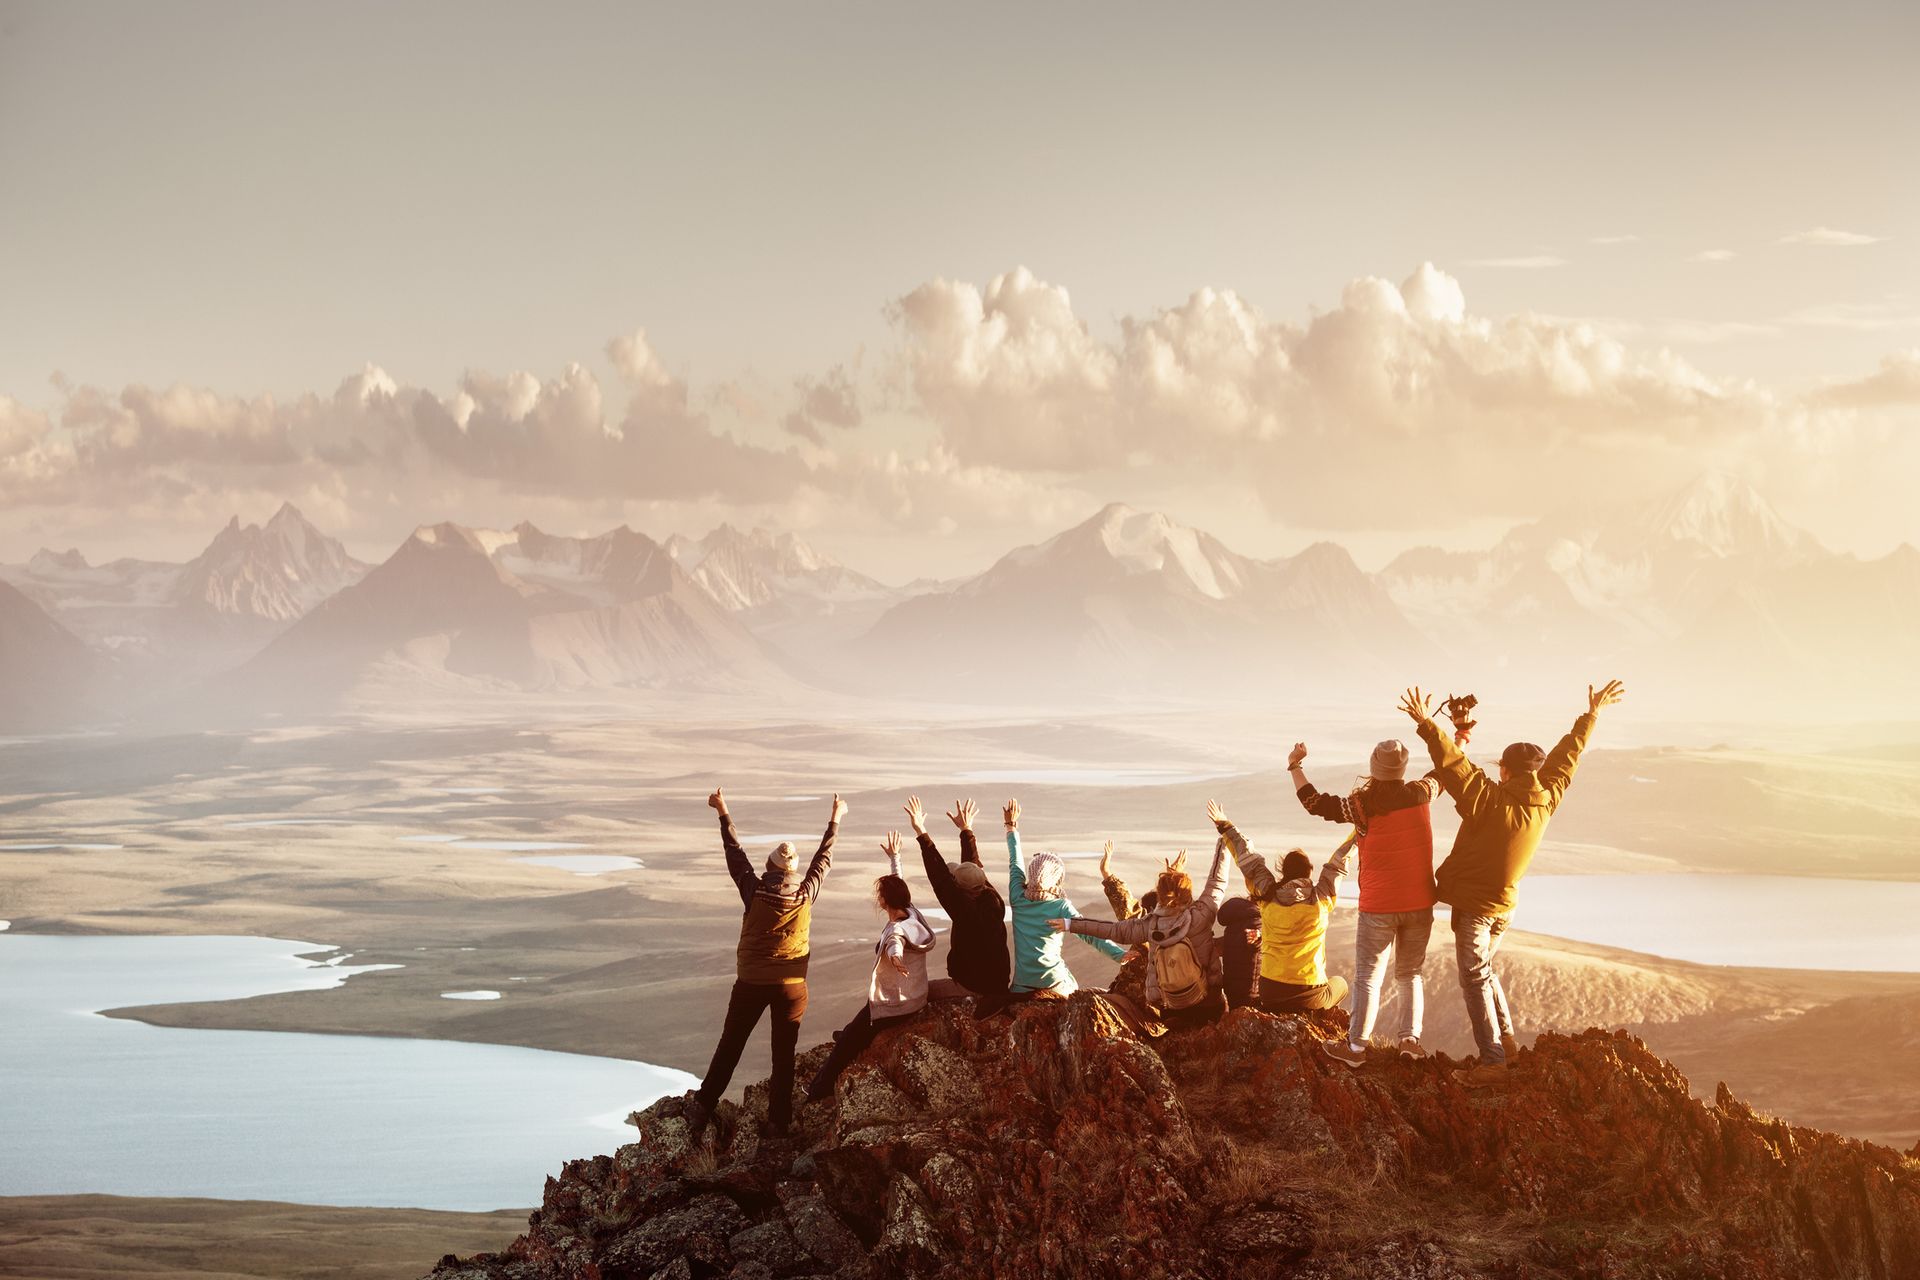 Big group of people having fun in success pose with raised arms on mountain top against sunset lakes and mountains. Travel, adventure or expedition concept